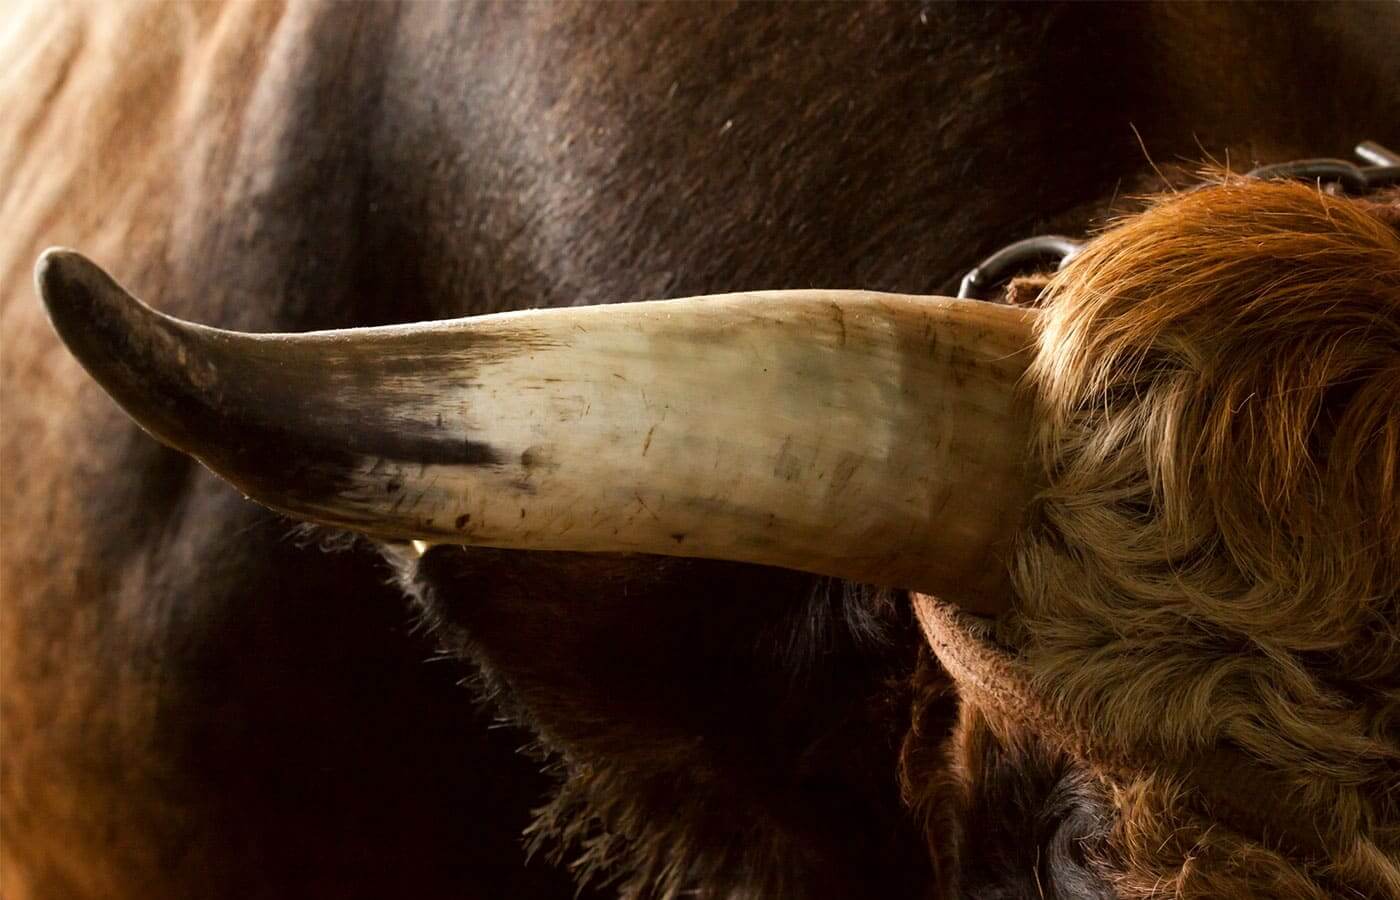 The horn of a large brown bull